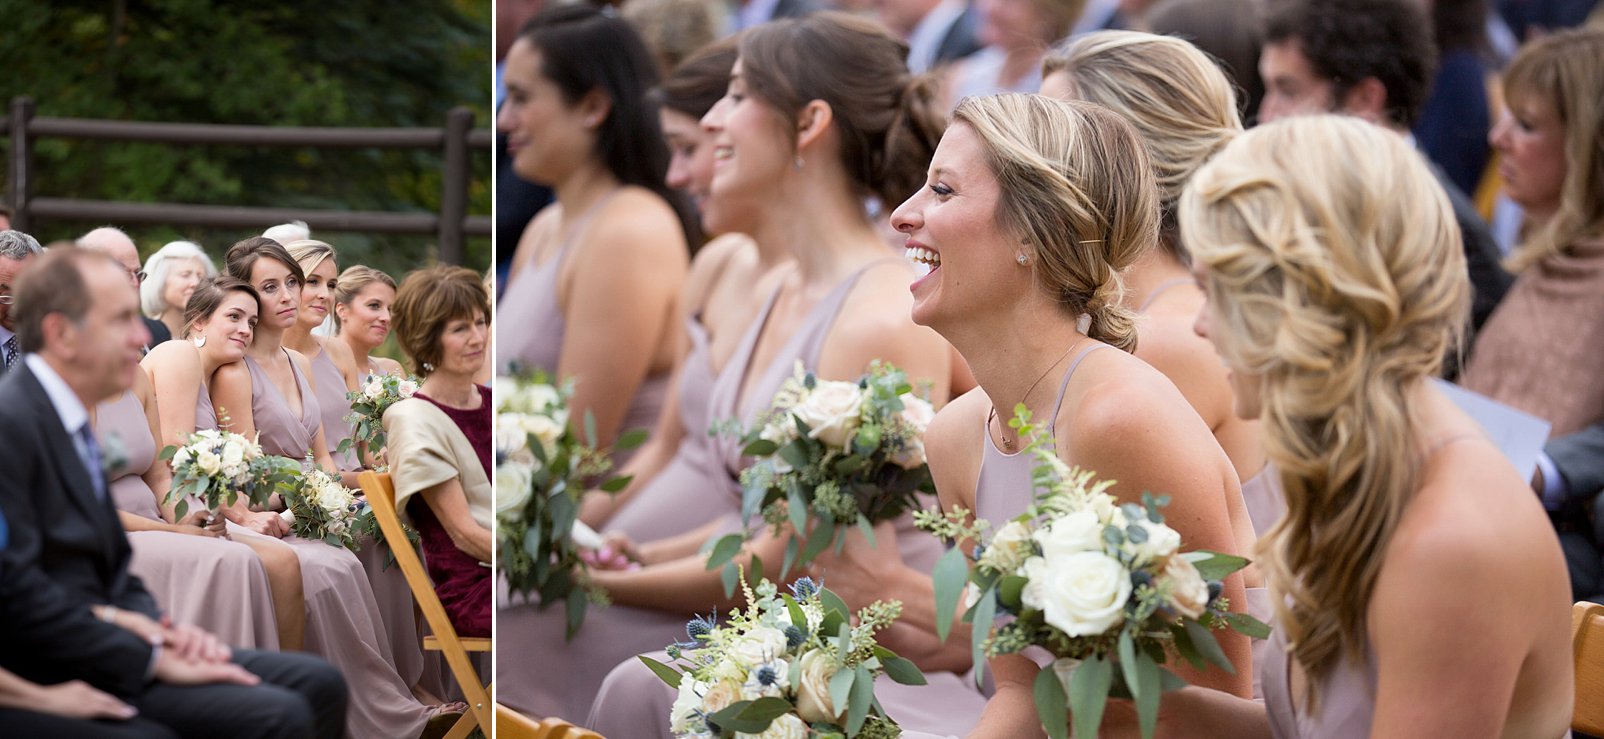 guests laughing during ceremony at larkspur vail wedding